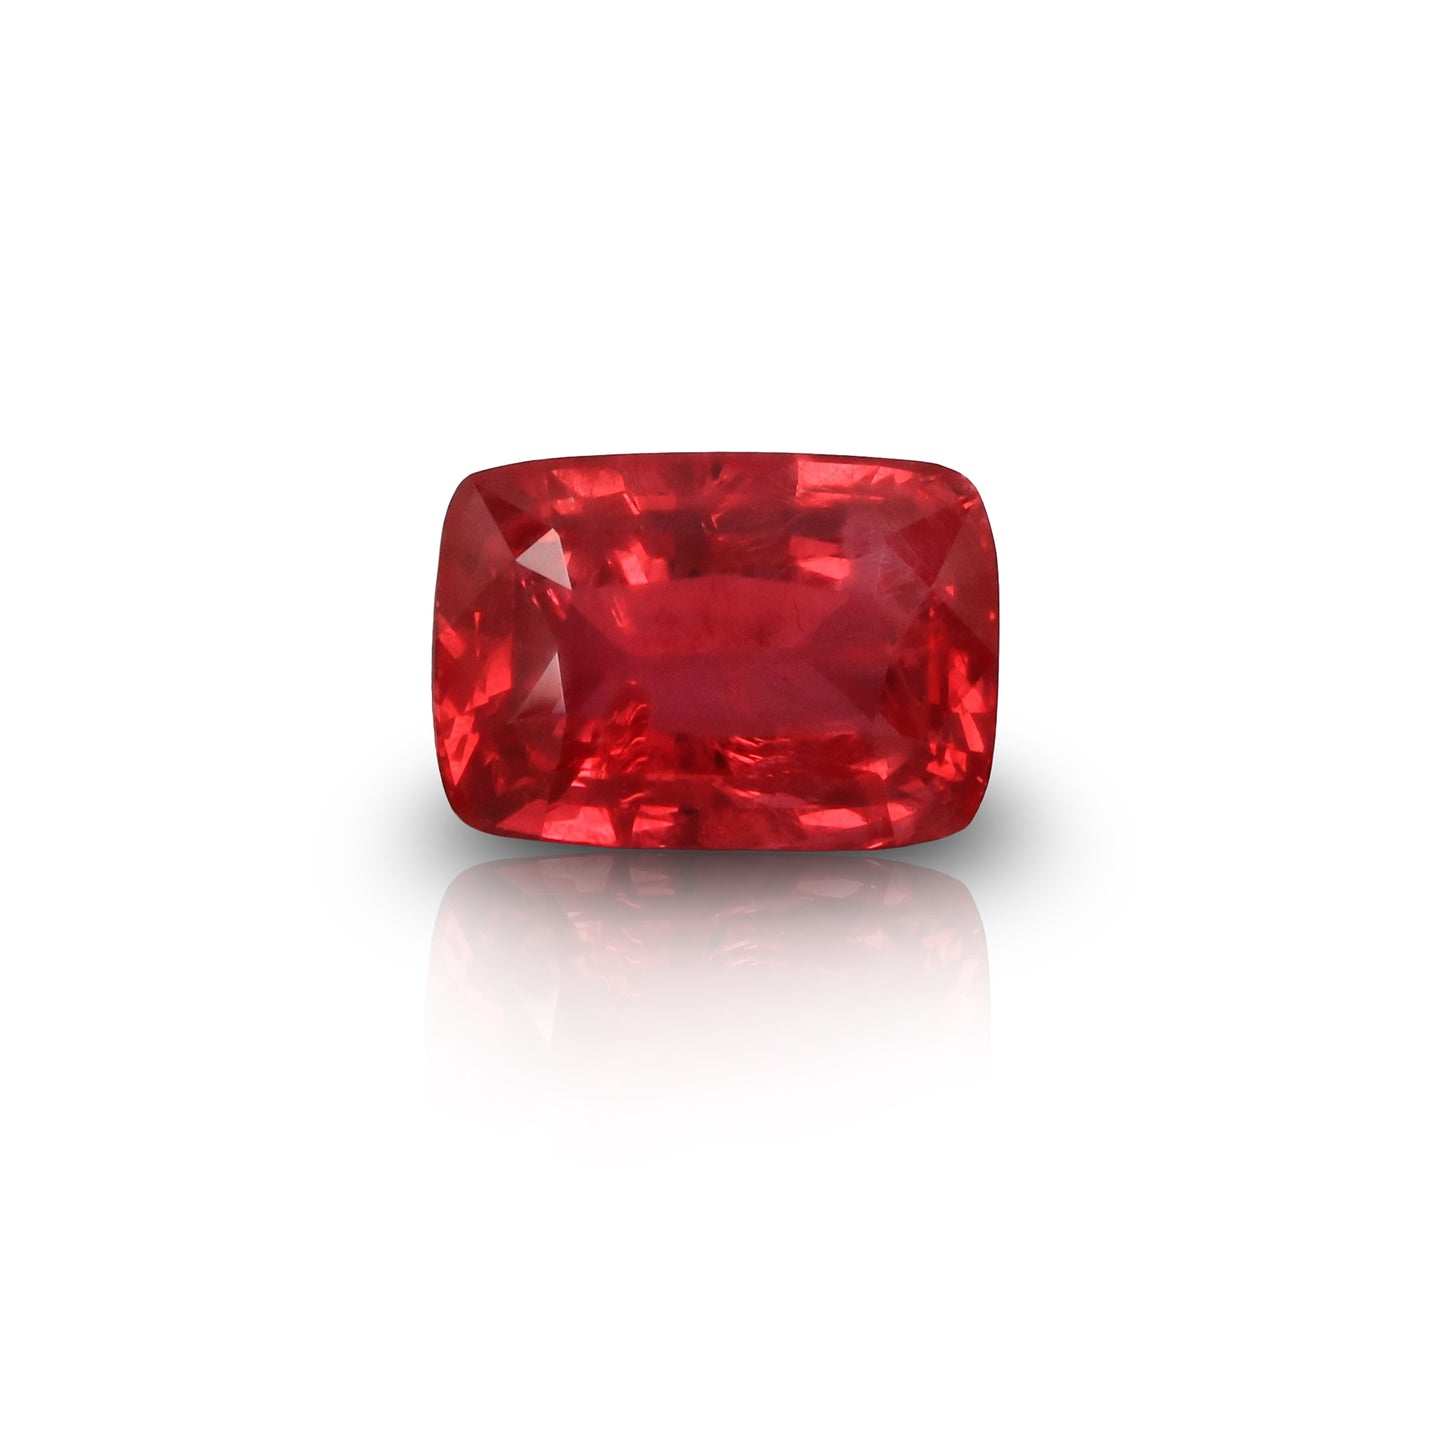 Natural Orange Red Tanzanian Spinel 7.31 Carats With GIA Report